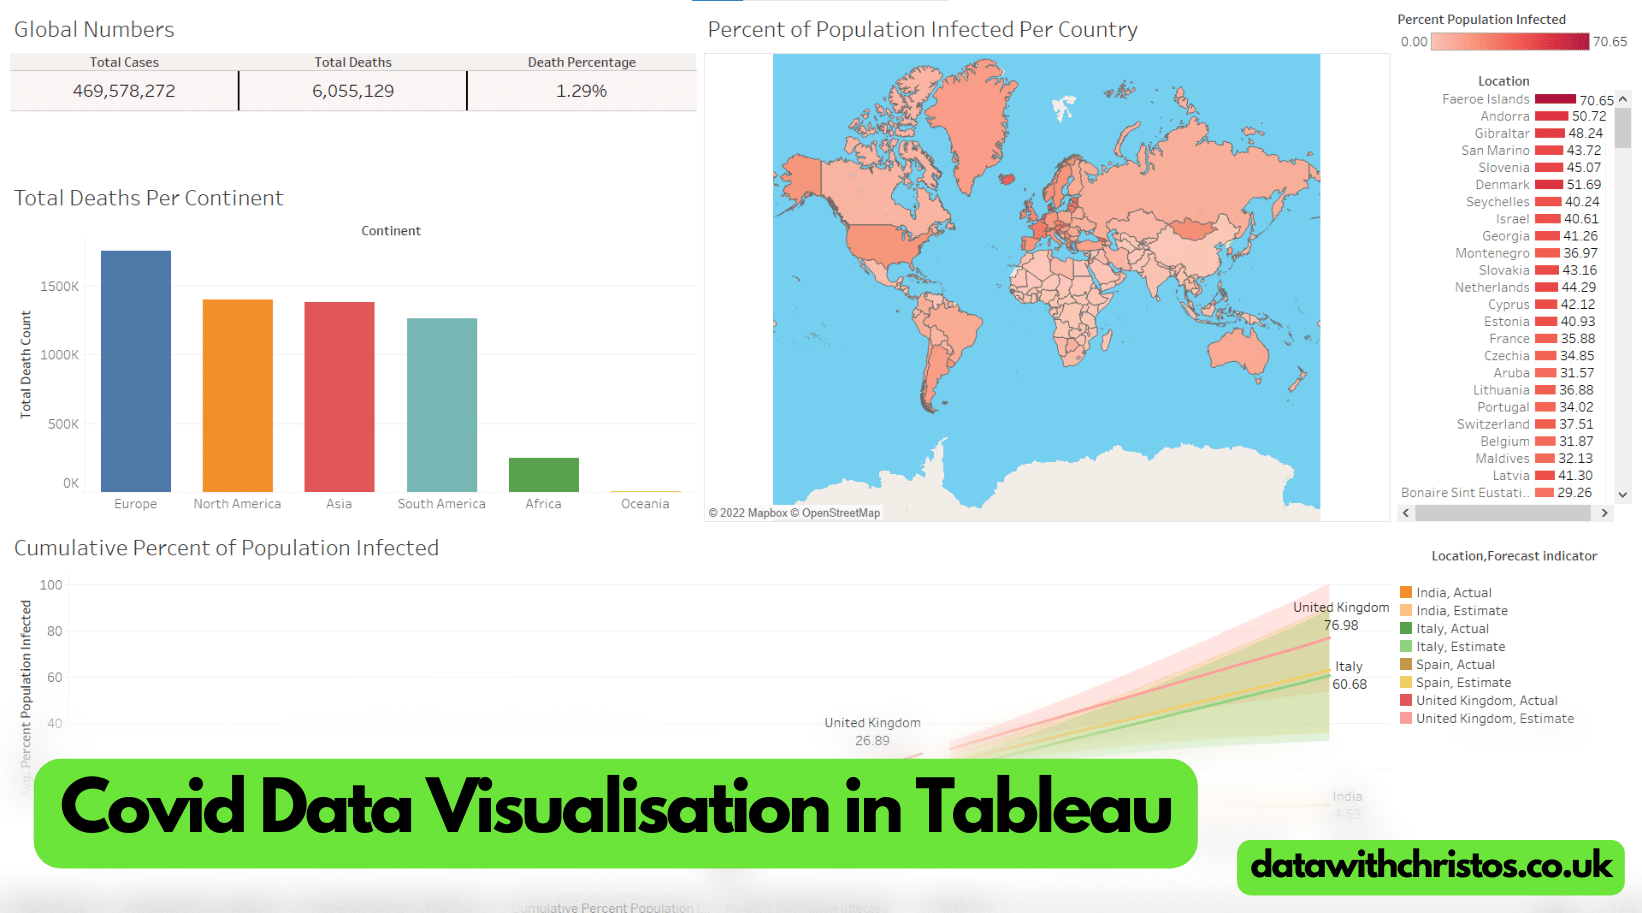 Covid Data Visualisation in Tableau